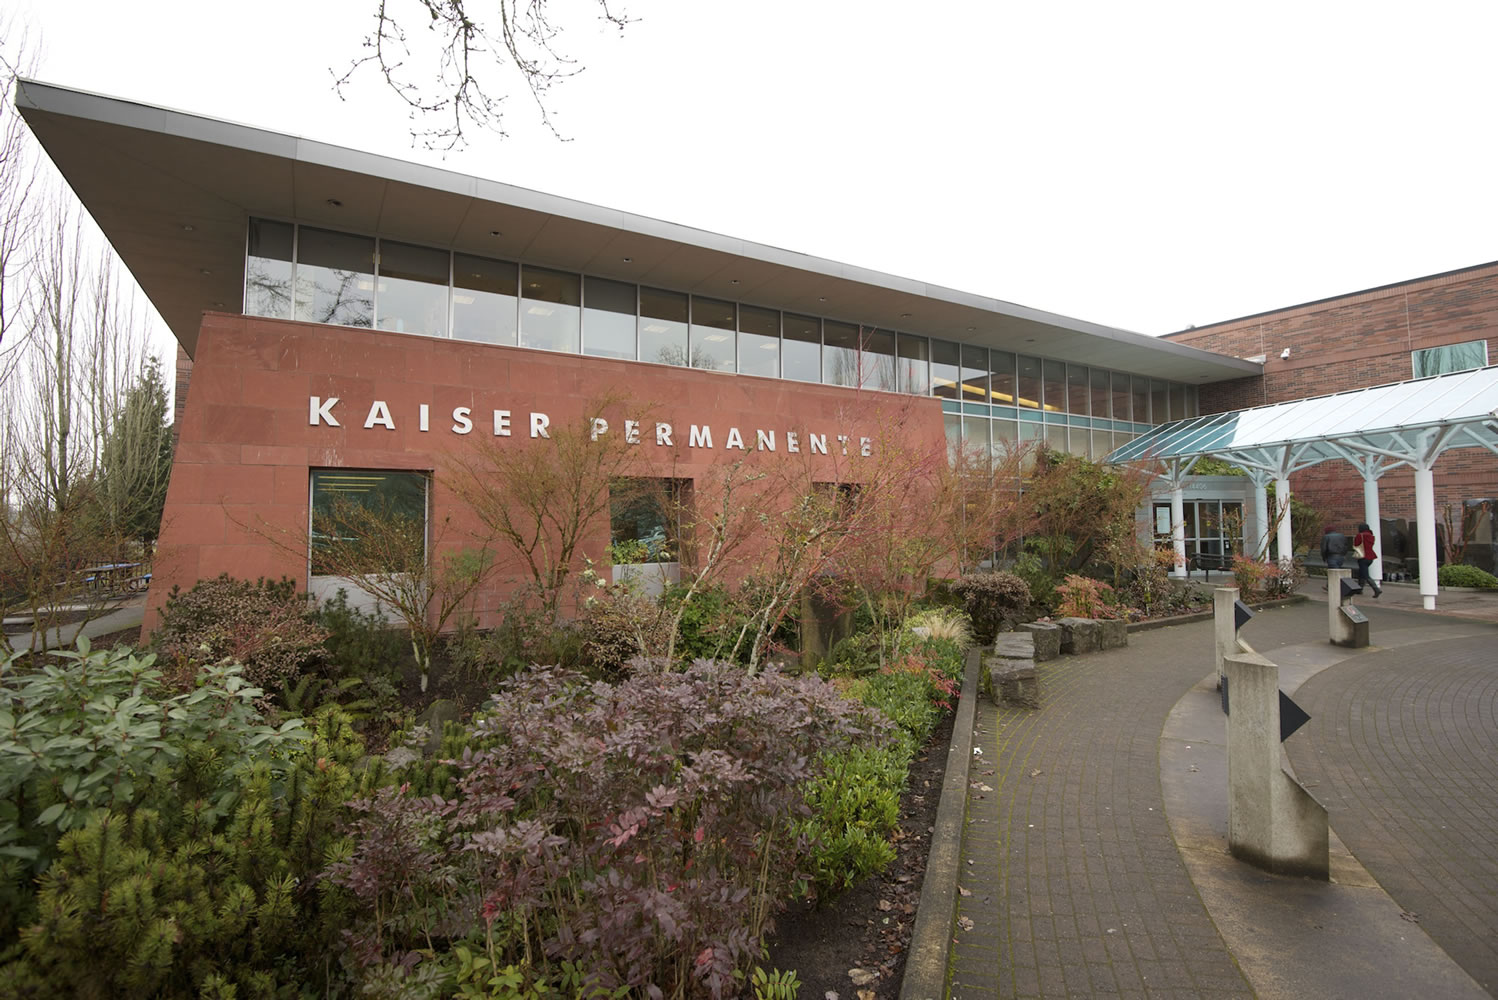 Even though Kaiser settled contract negotiations with some labor unions in November, disagreement continues between Kaiser and the Coalition of Kaiser Permanente Unions, which consists of 11 labor unions in California, Oregon, Washington, Colorado, Hawaii, Virginia, Maryland and the District of Columbia.